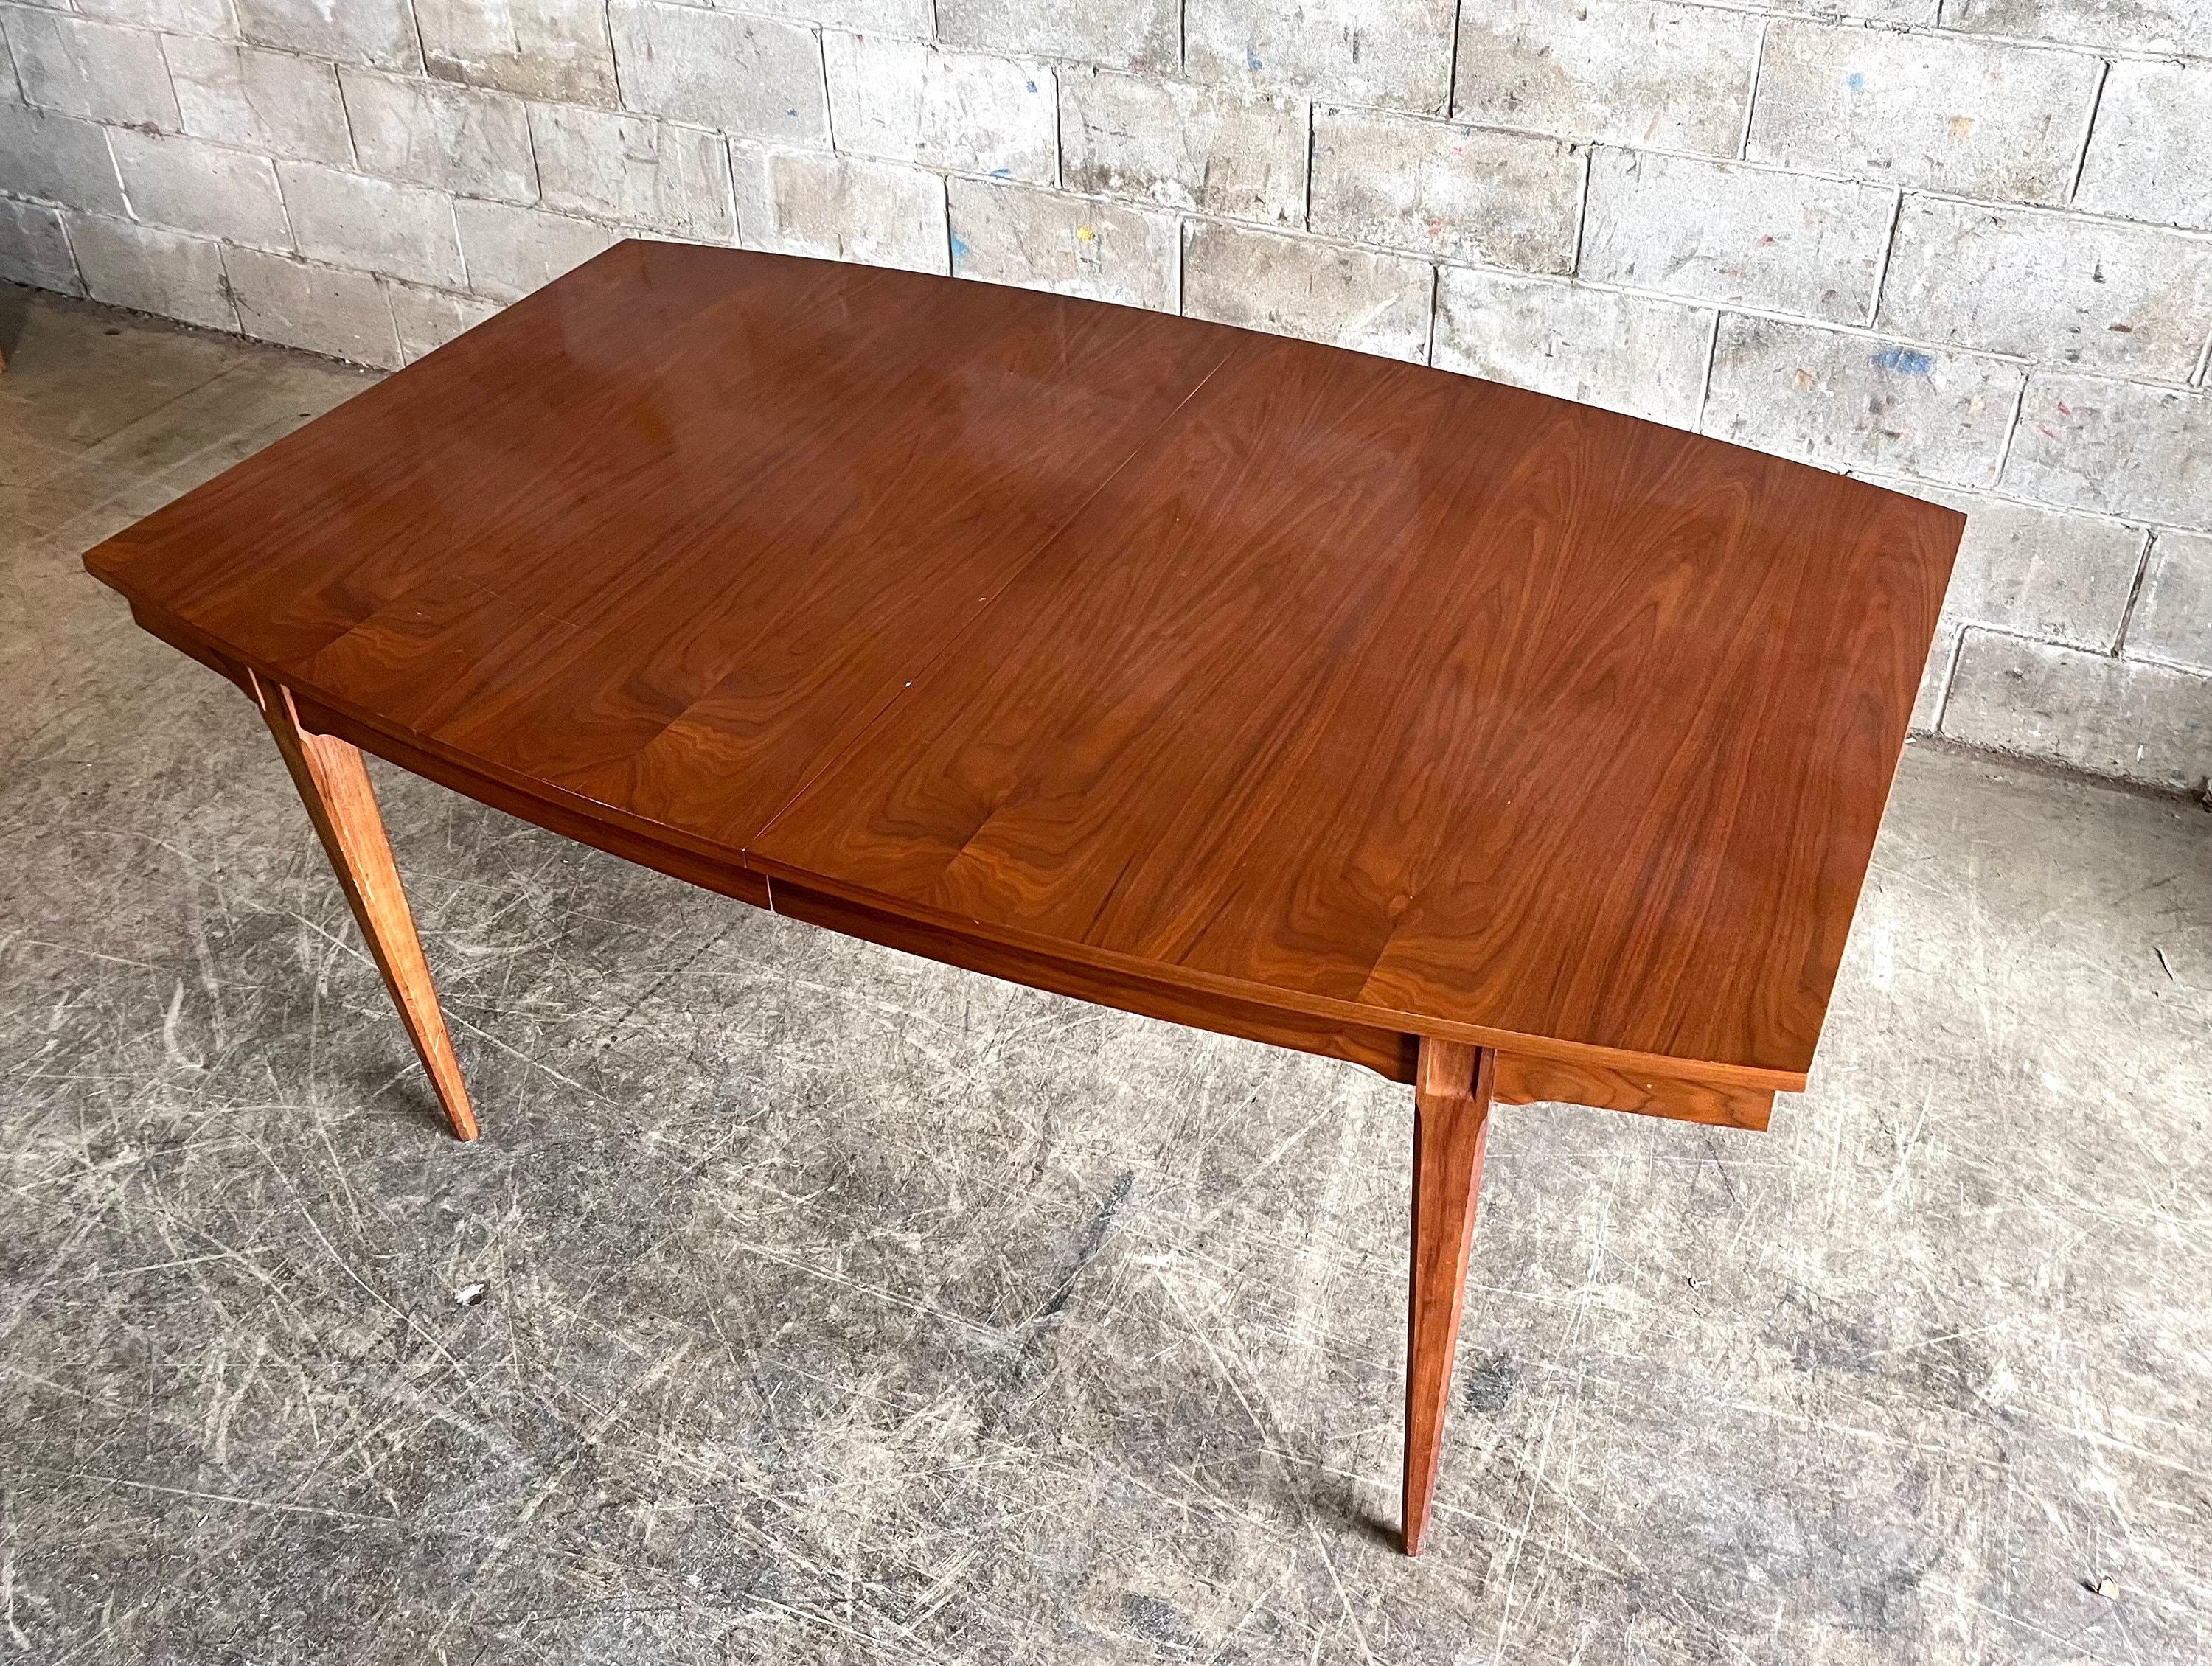 American Young Manufacturing Vintage Mid Century Modern Walnut Dining Table c. 1960s